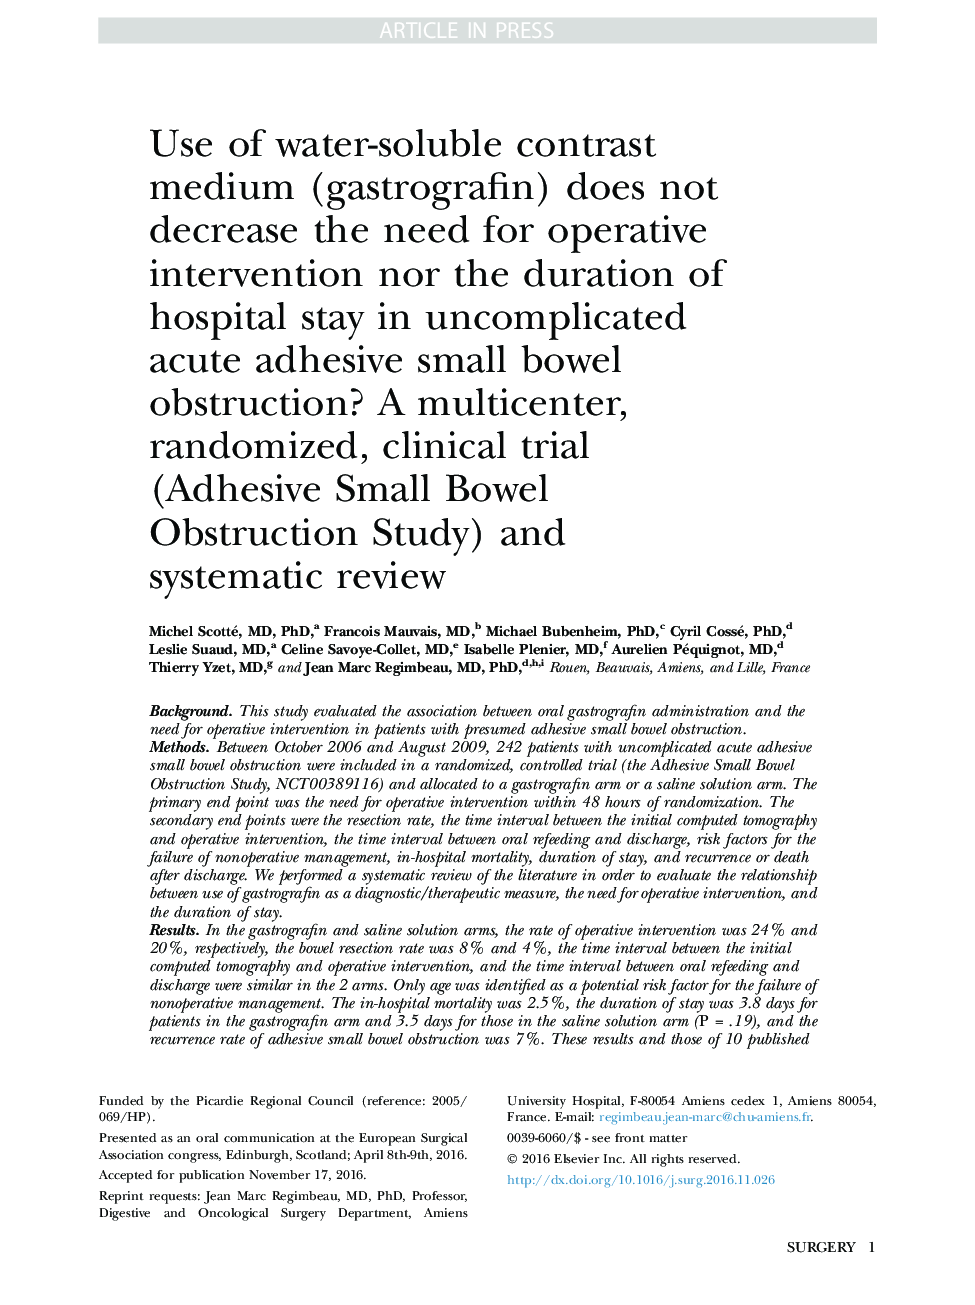 Use of water-soluble contrast medium (gastrografin) does not decrease the need for operative intervention nor the duration of hospital stay in uncomplicated acute adhesive small bowel obstruction? A multicenter, randomized, clinical trial (Adhesive Small 